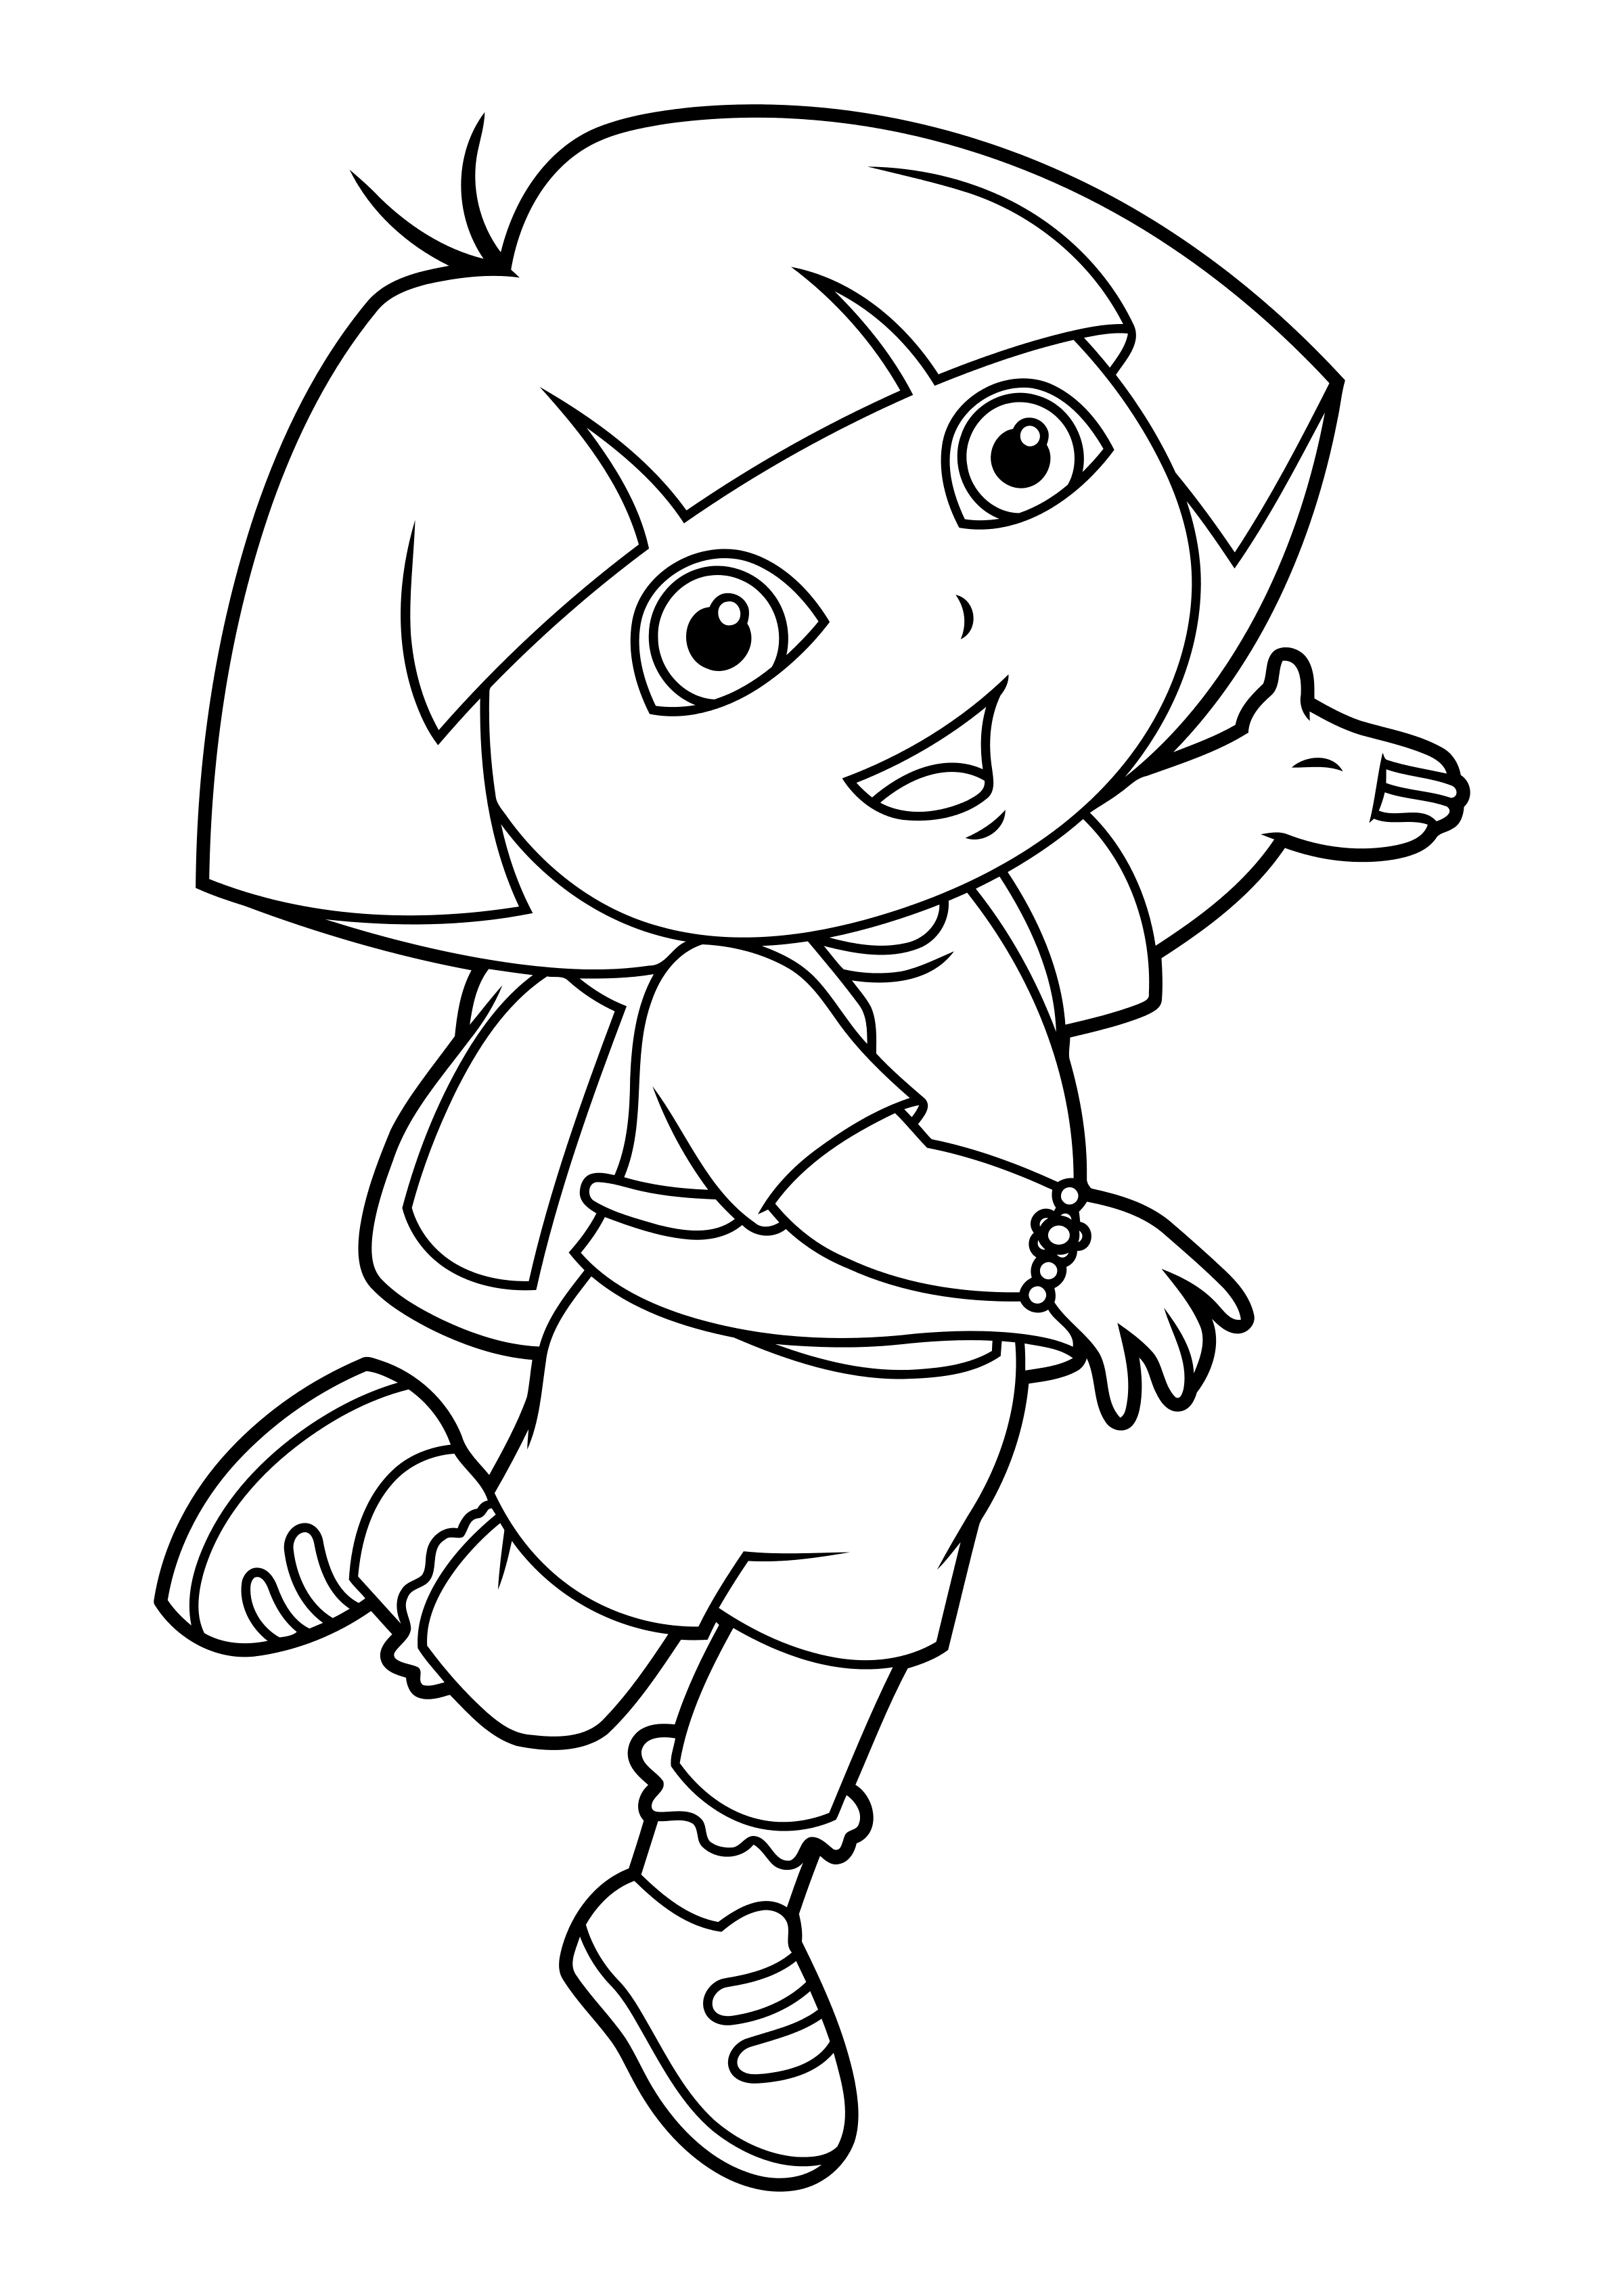 Coloring page Dora the Explorer Dora in full growth